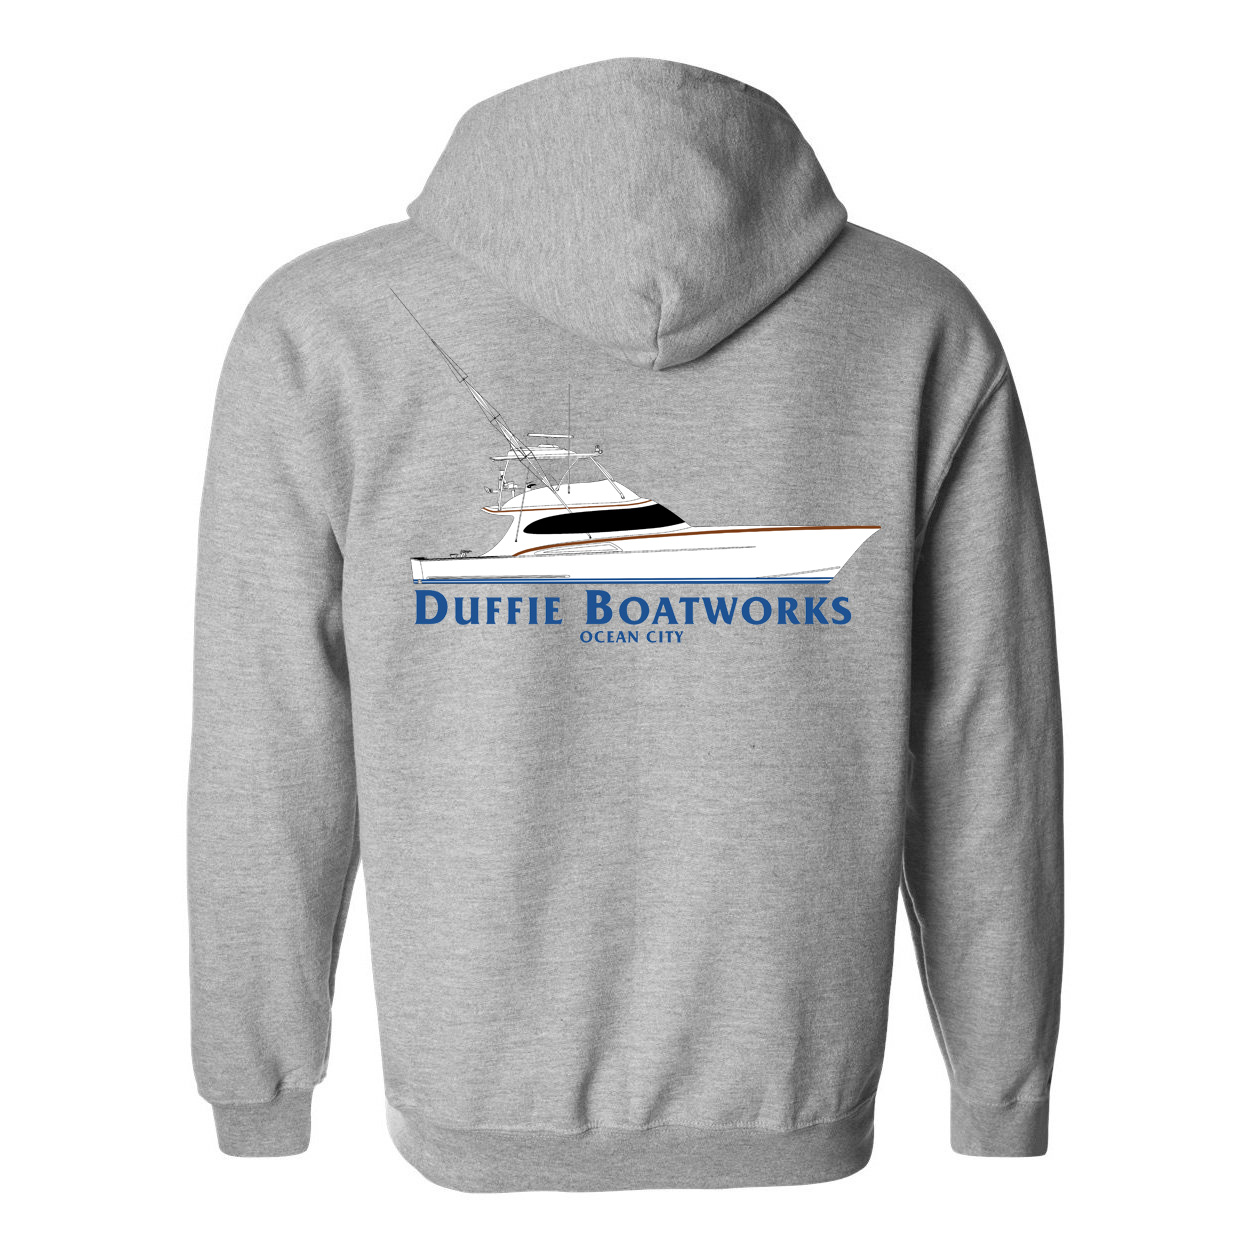 Duffie Boatworks x Sunset Marina Hoodie  Ocean City MD Fishing Charter Boat  Sport Fishing